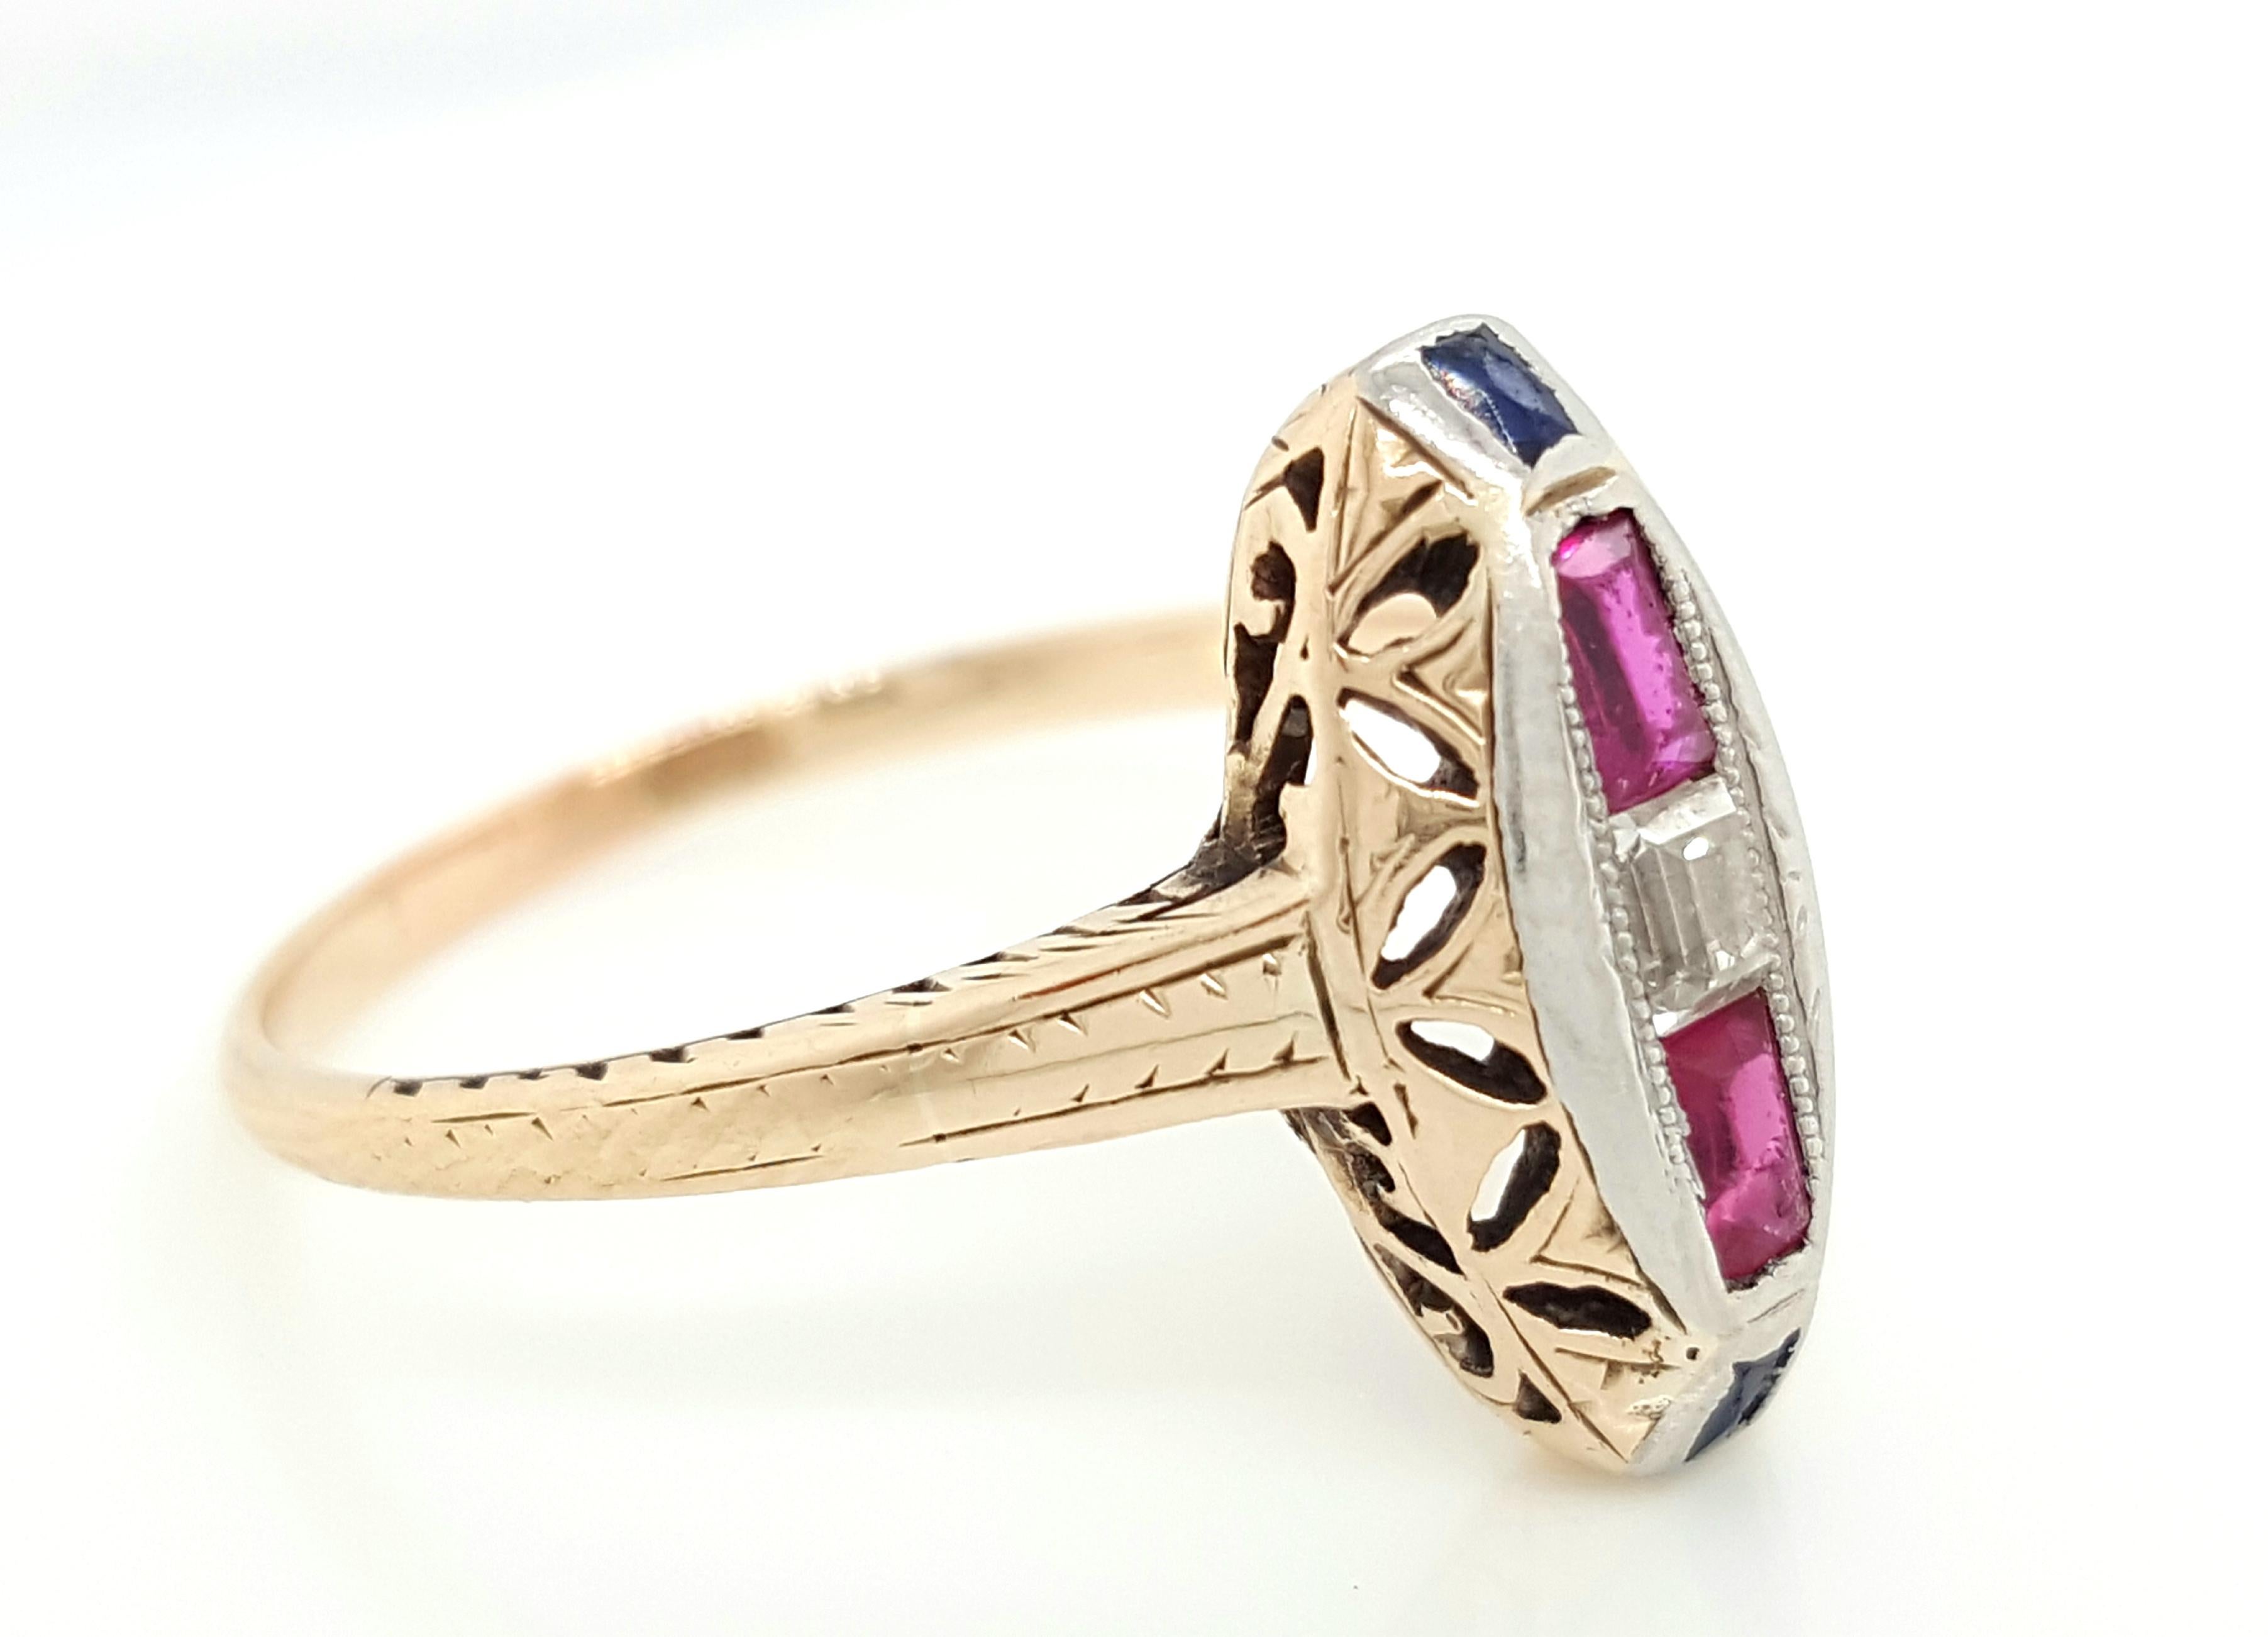 This is an exquisite example of a Victorian Navette marquise-shaped ring. It is crafted in yellow gold and the center features 2 blood red rubies of the finest quality, 2 Sapphires and 1 Emerald Step Cut diamond. This would make an excellent